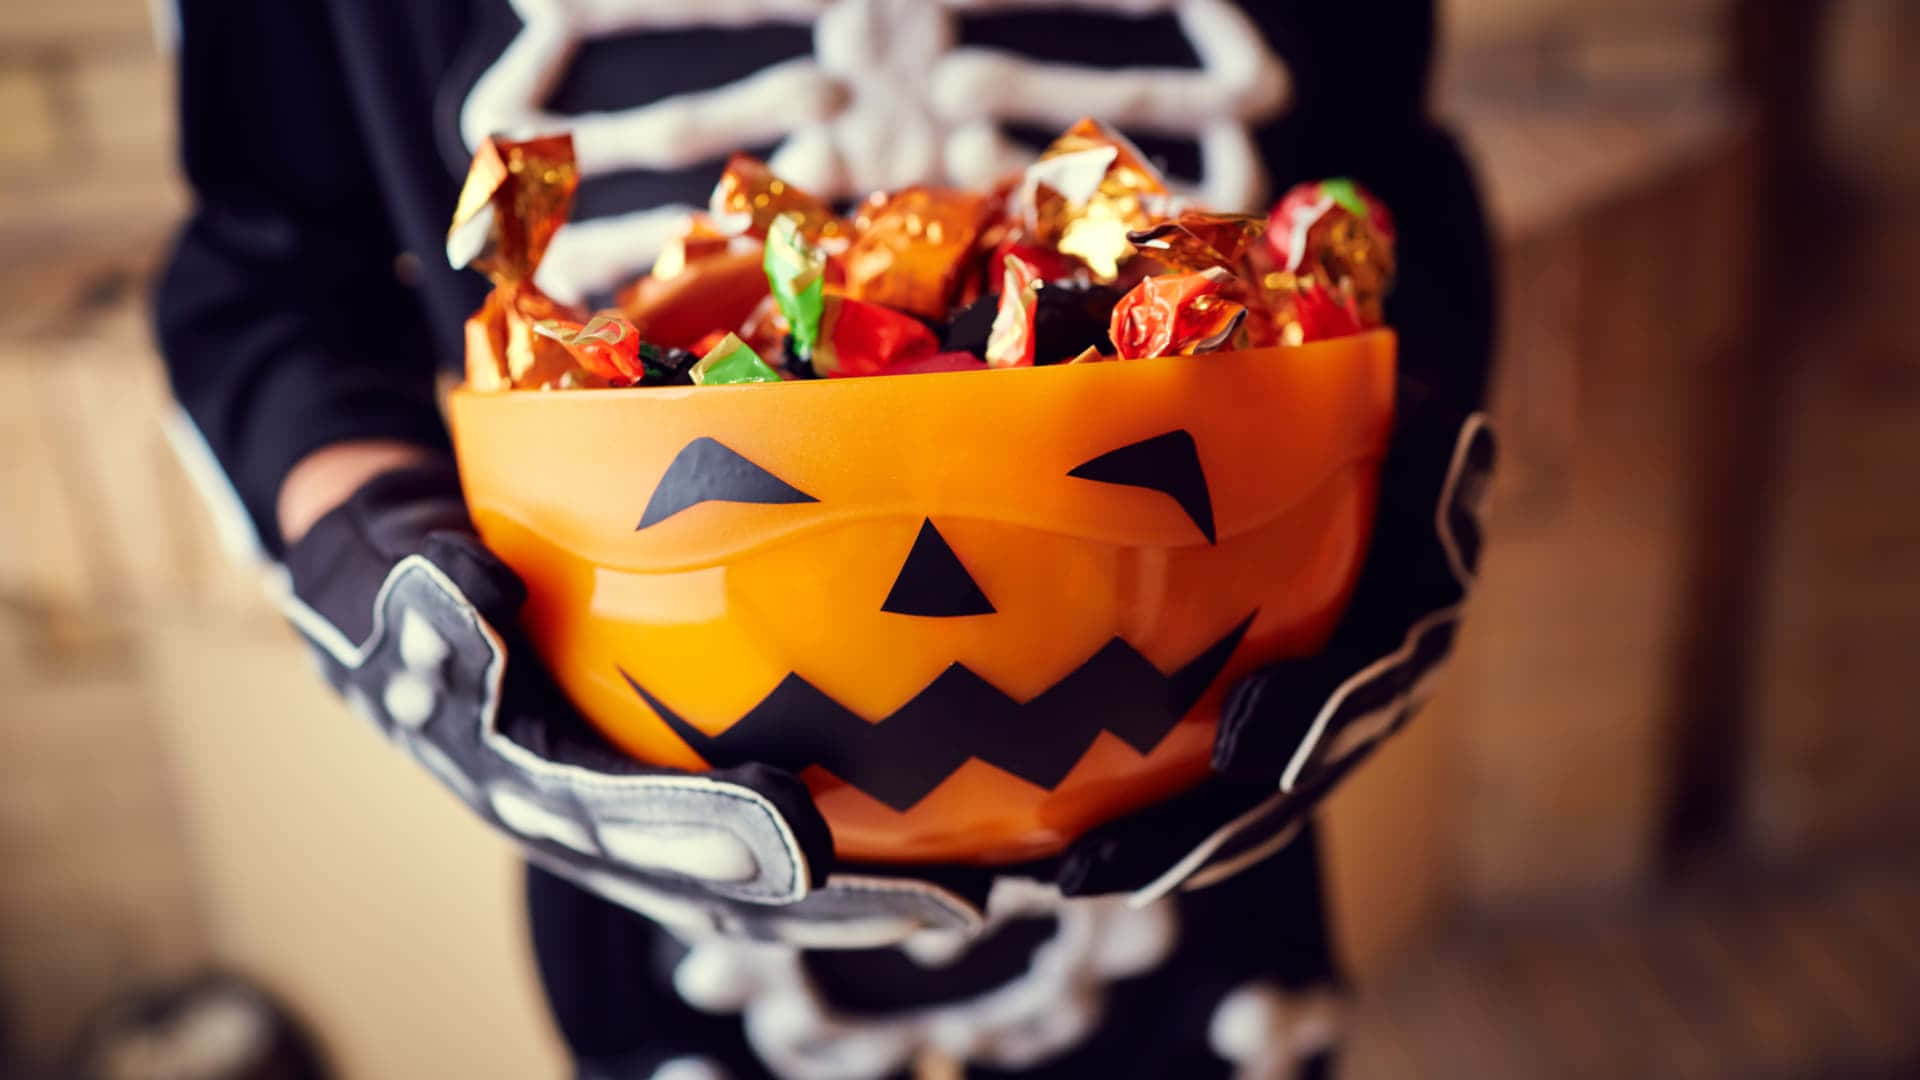 Get into the spirit of the season with homemade Halloween treats! Wallpaper